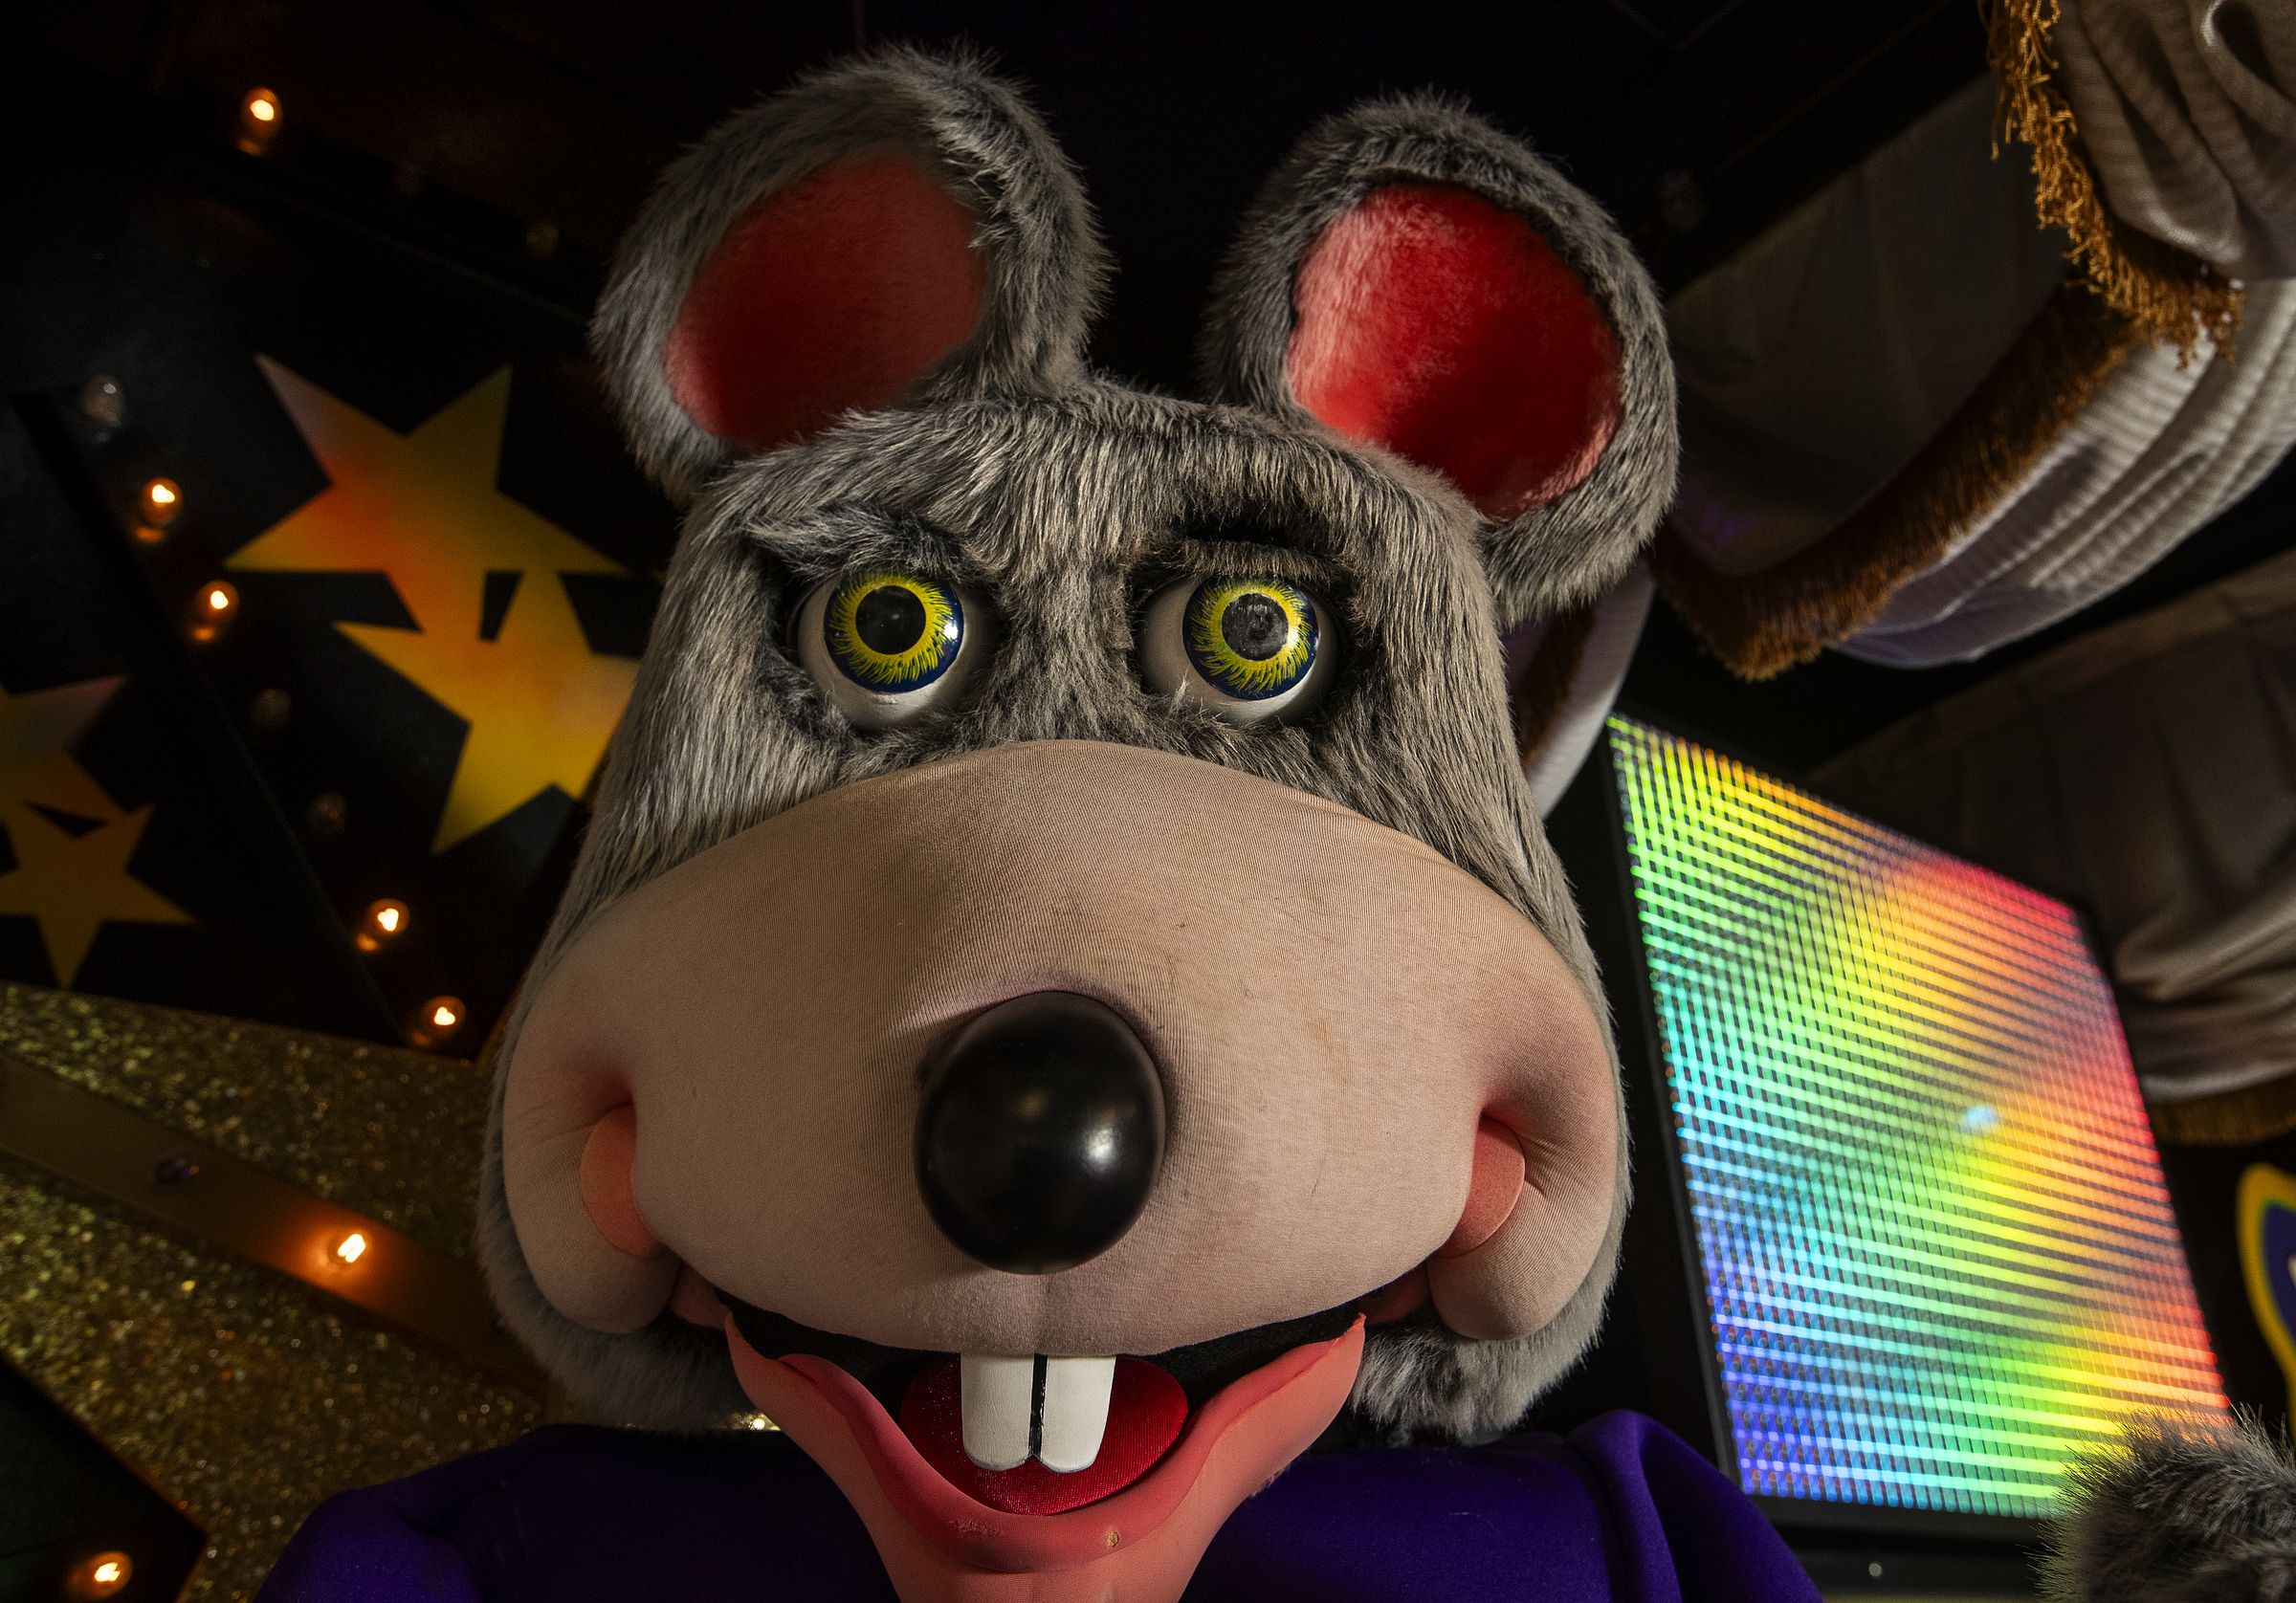 Northridge location of Chuck E. Cheese is soon going to be the last remaining pizza center to house an animatronic band